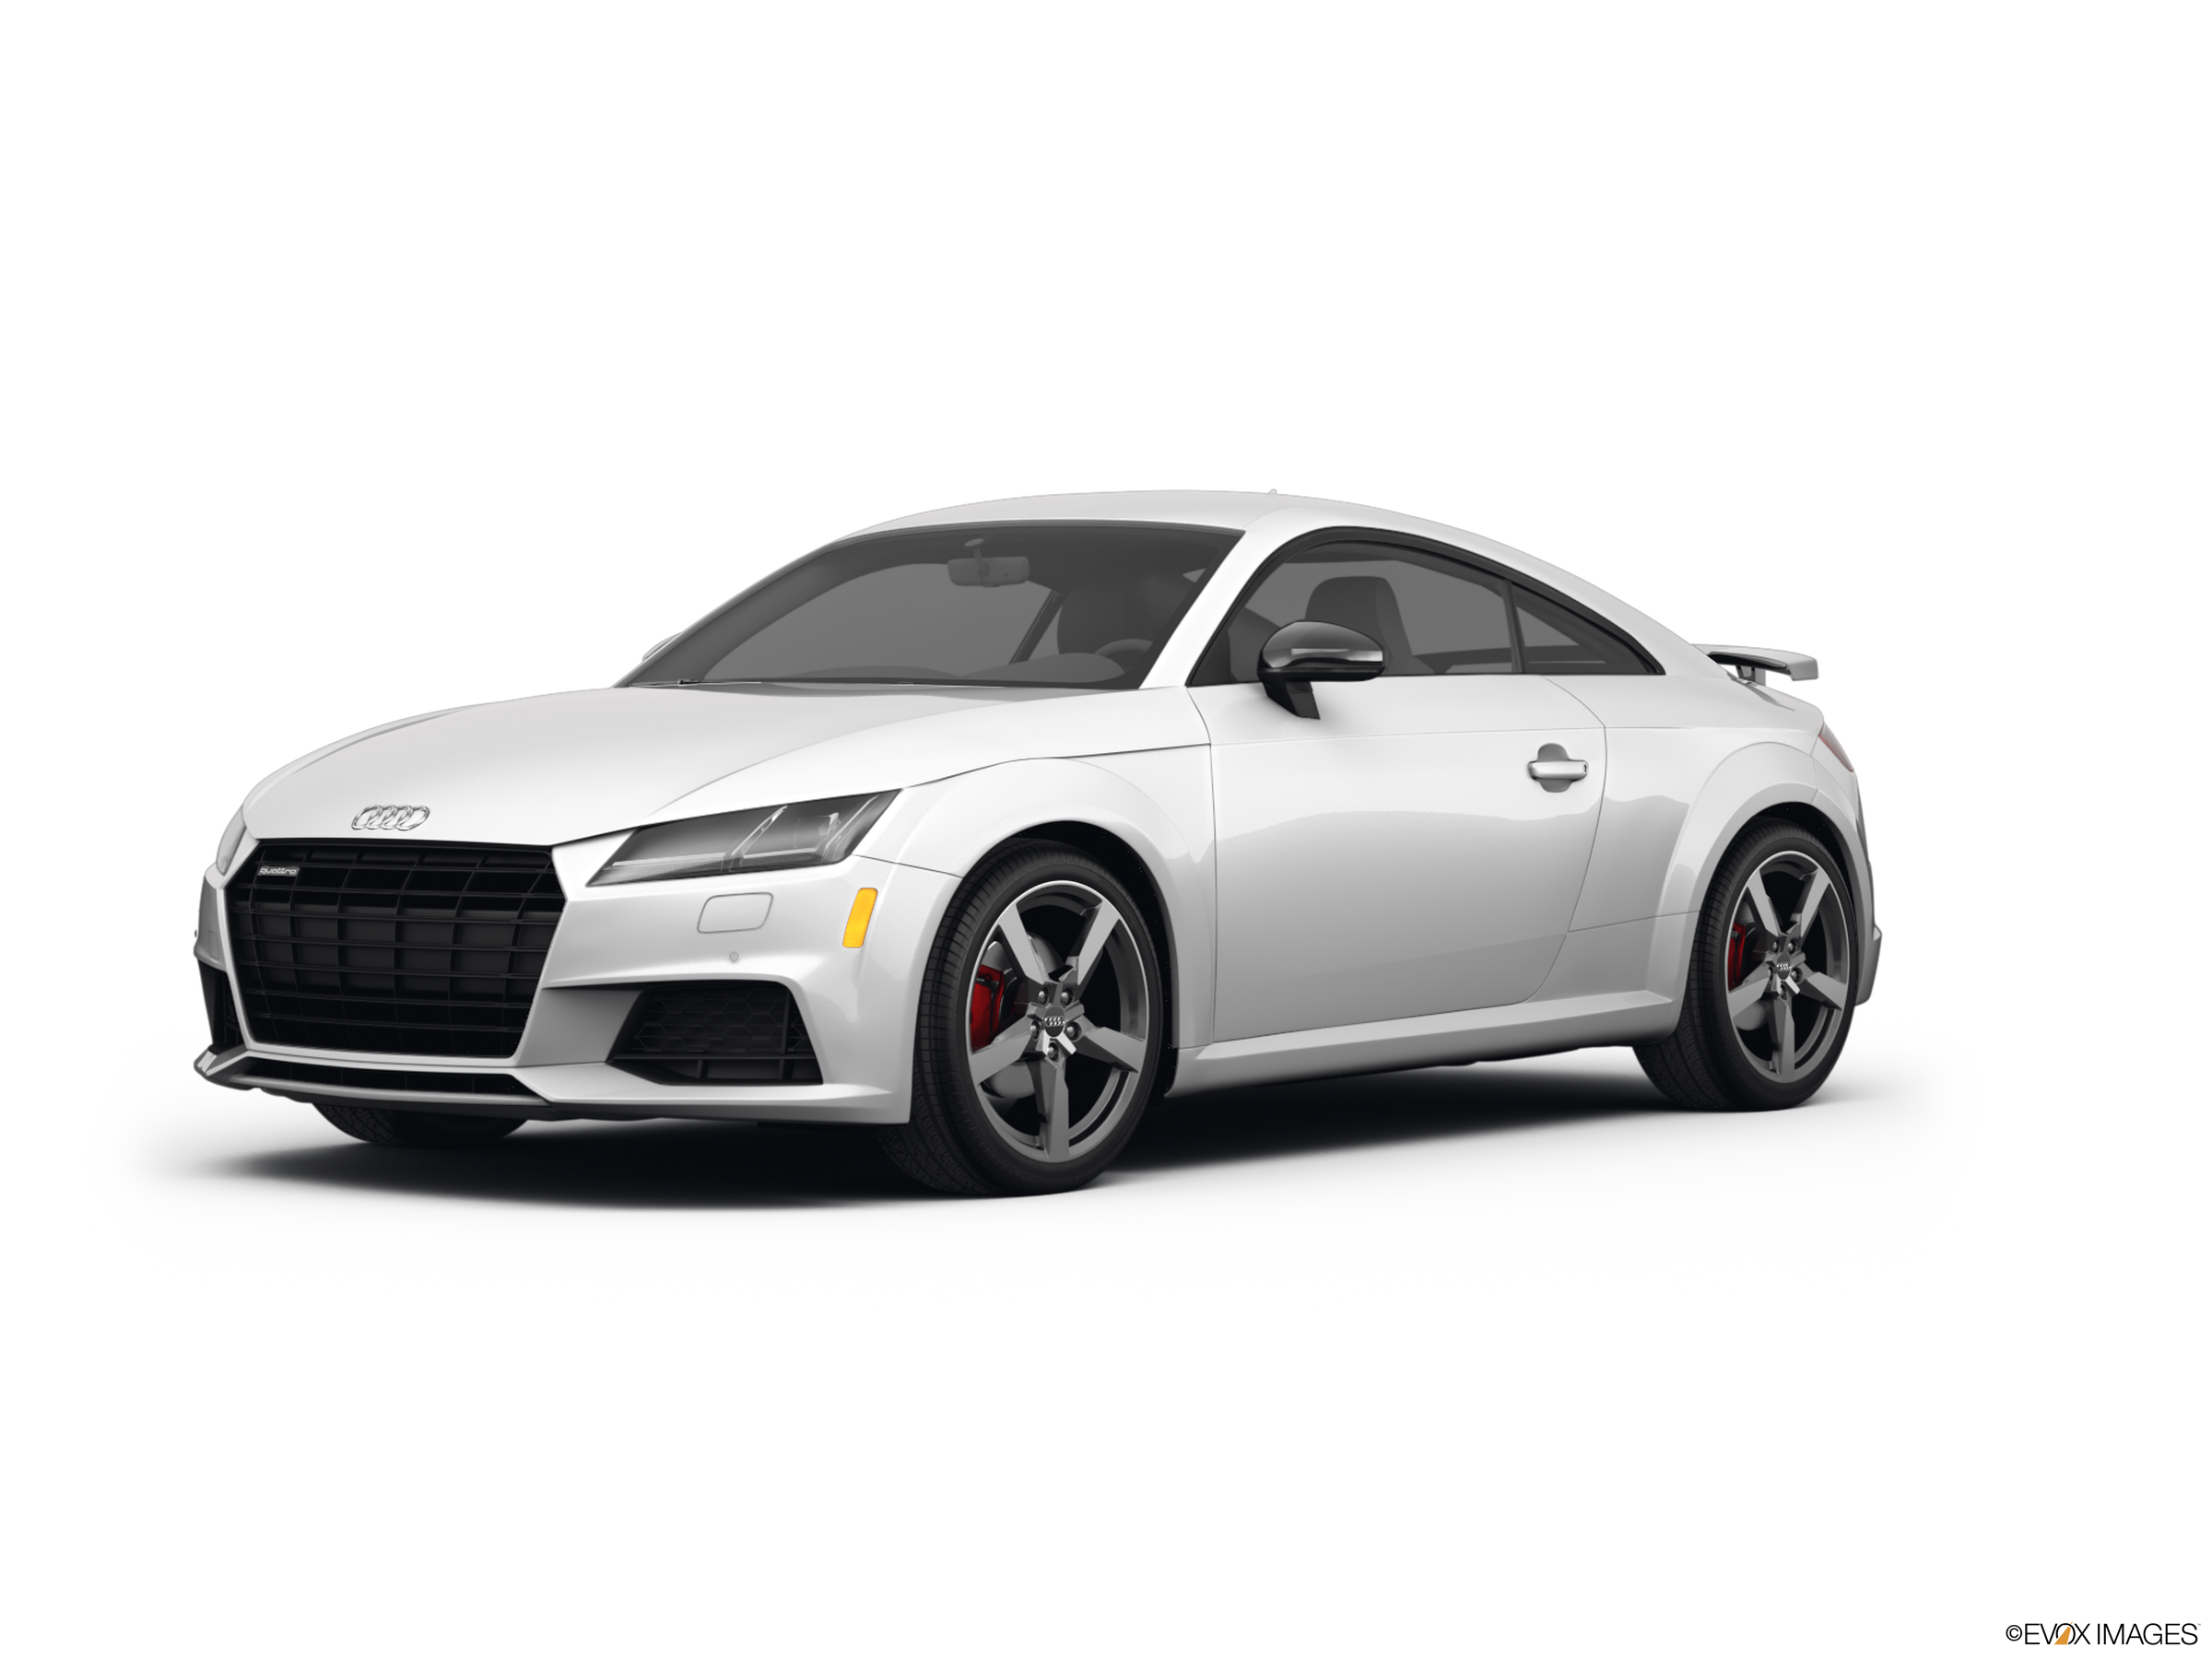 The history of the Audi TT